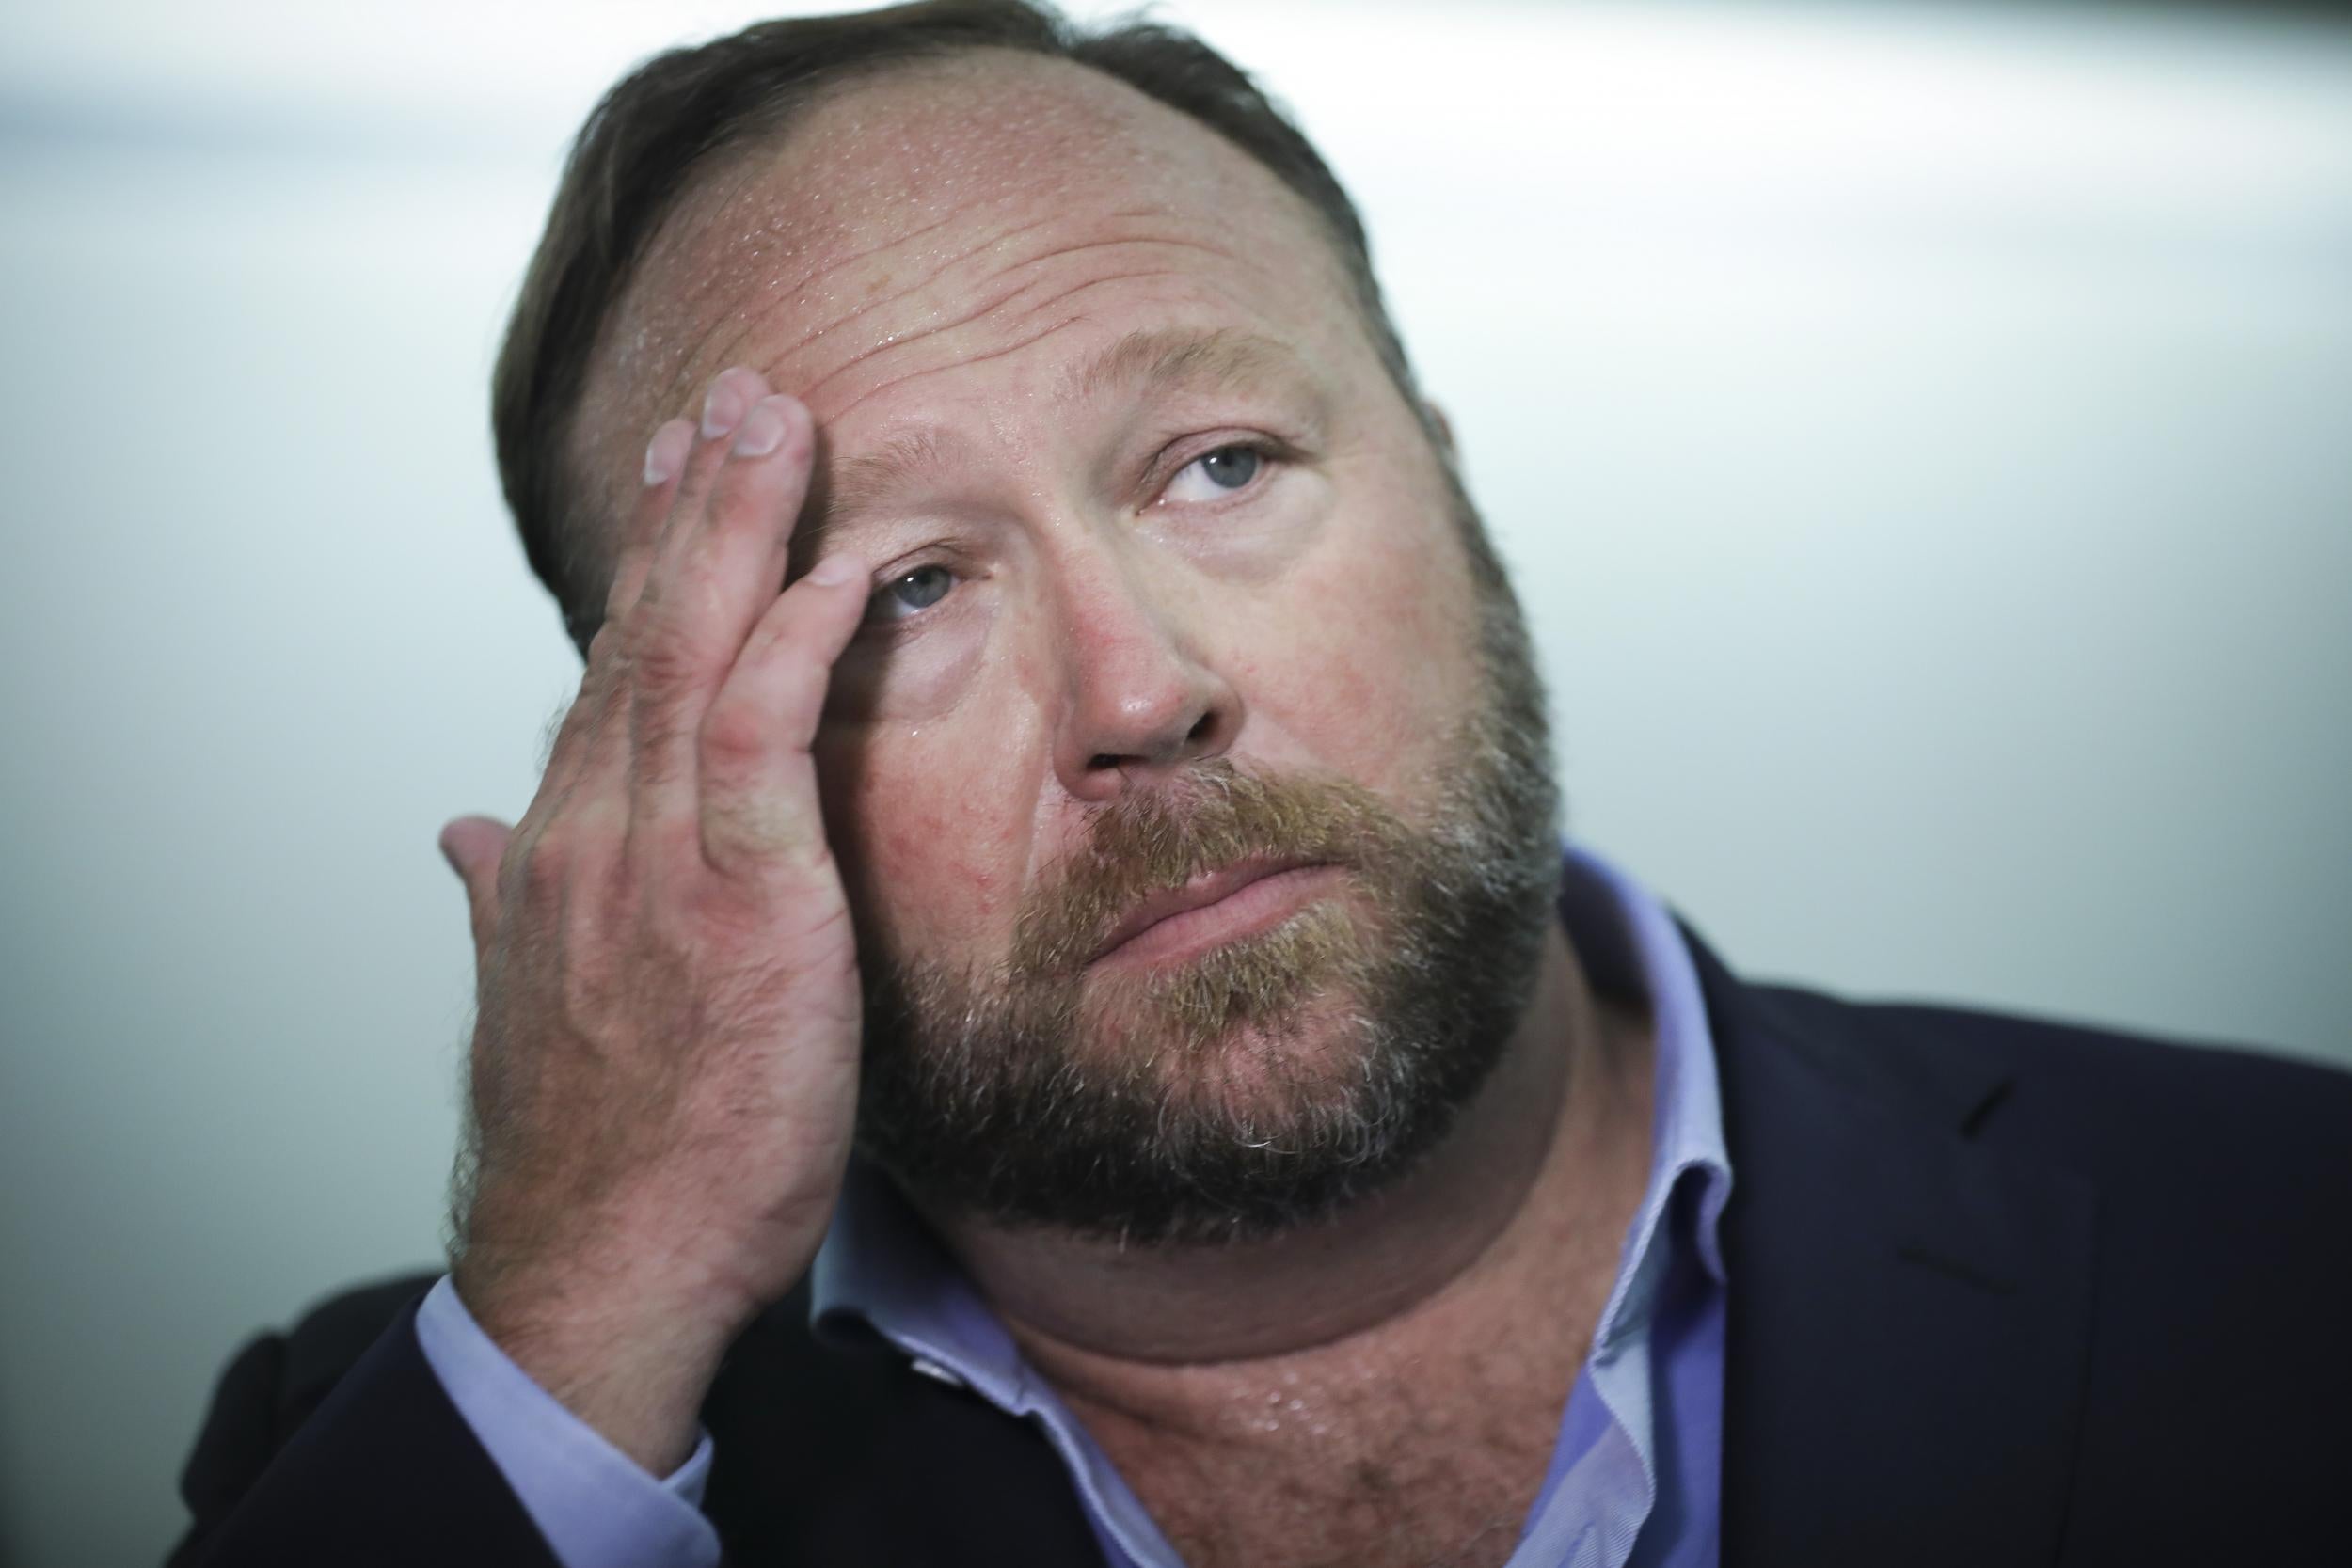 Alex Jones' (above) conspiracy site Infowars to pay $15,000 settlement in copyright dispute over Pepe the Frog cartoon